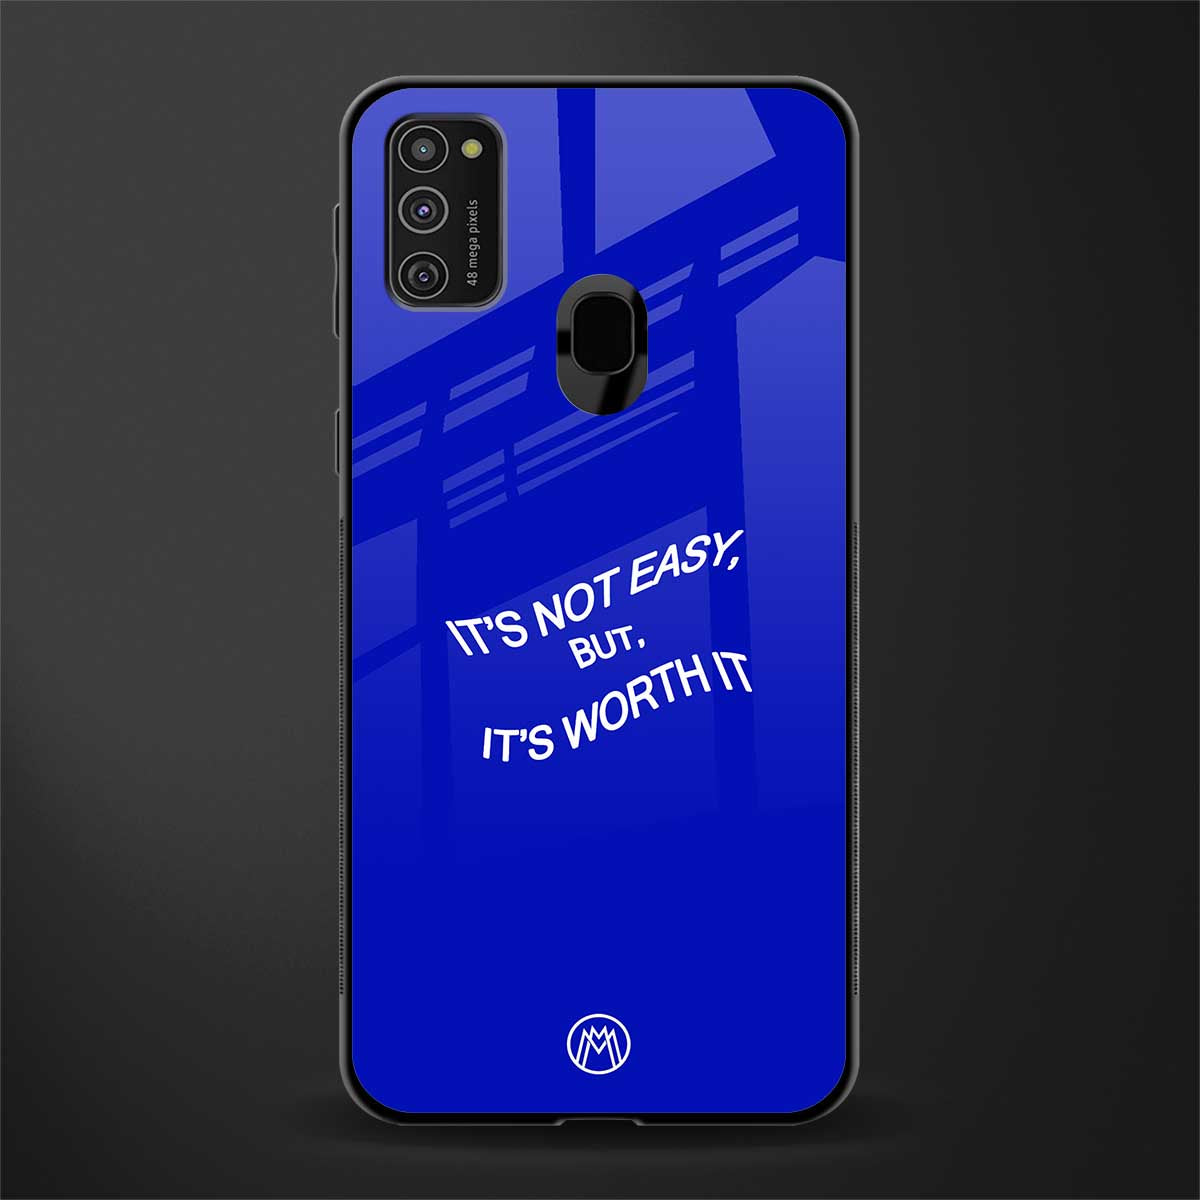 worth it glass case for samsung galaxy m30s image